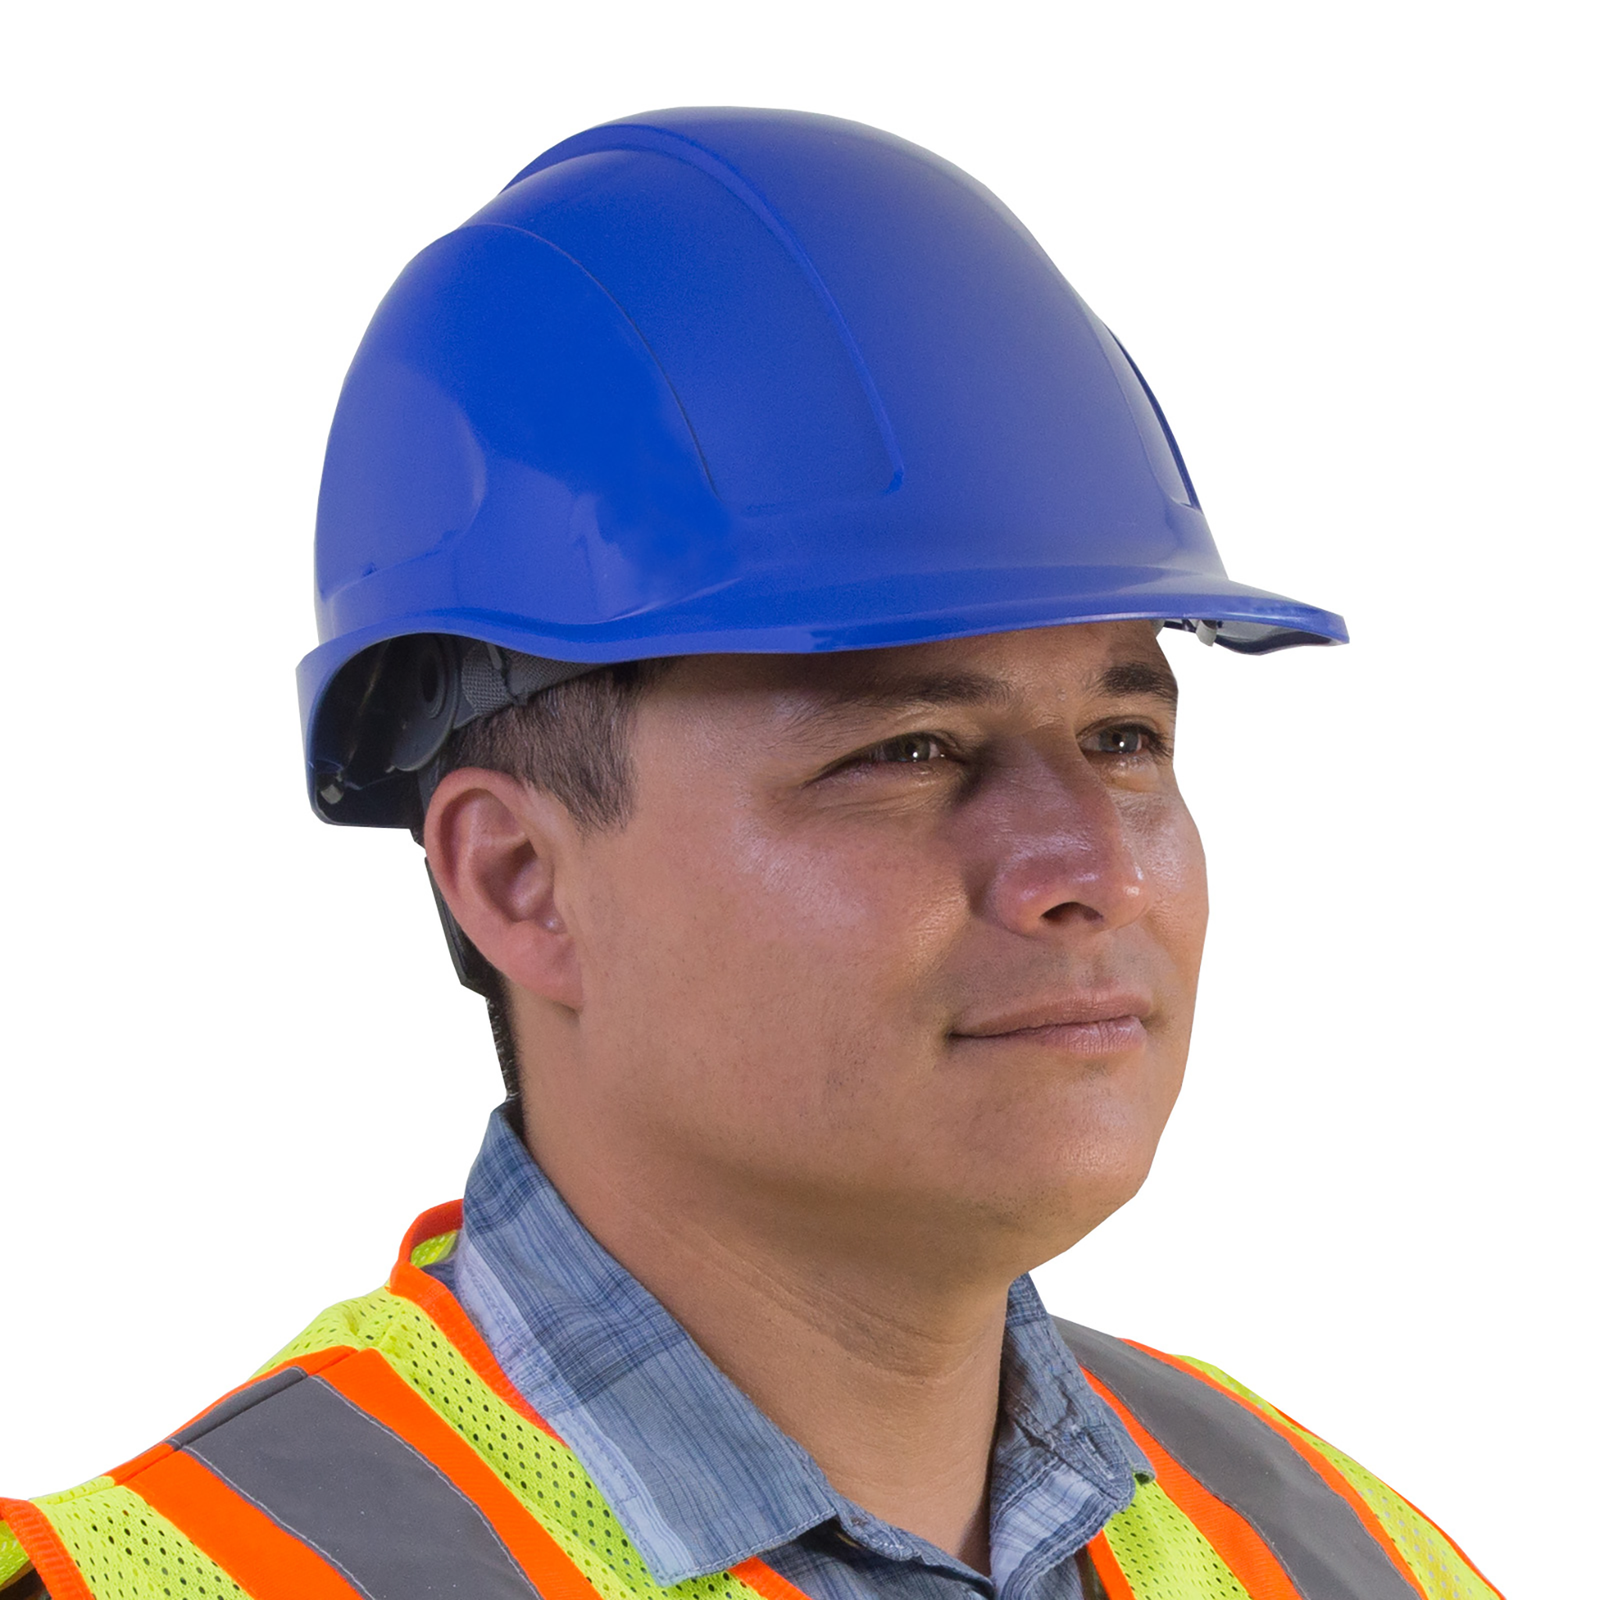 A person wearing a blue cap style JORESTECH safety hard hat